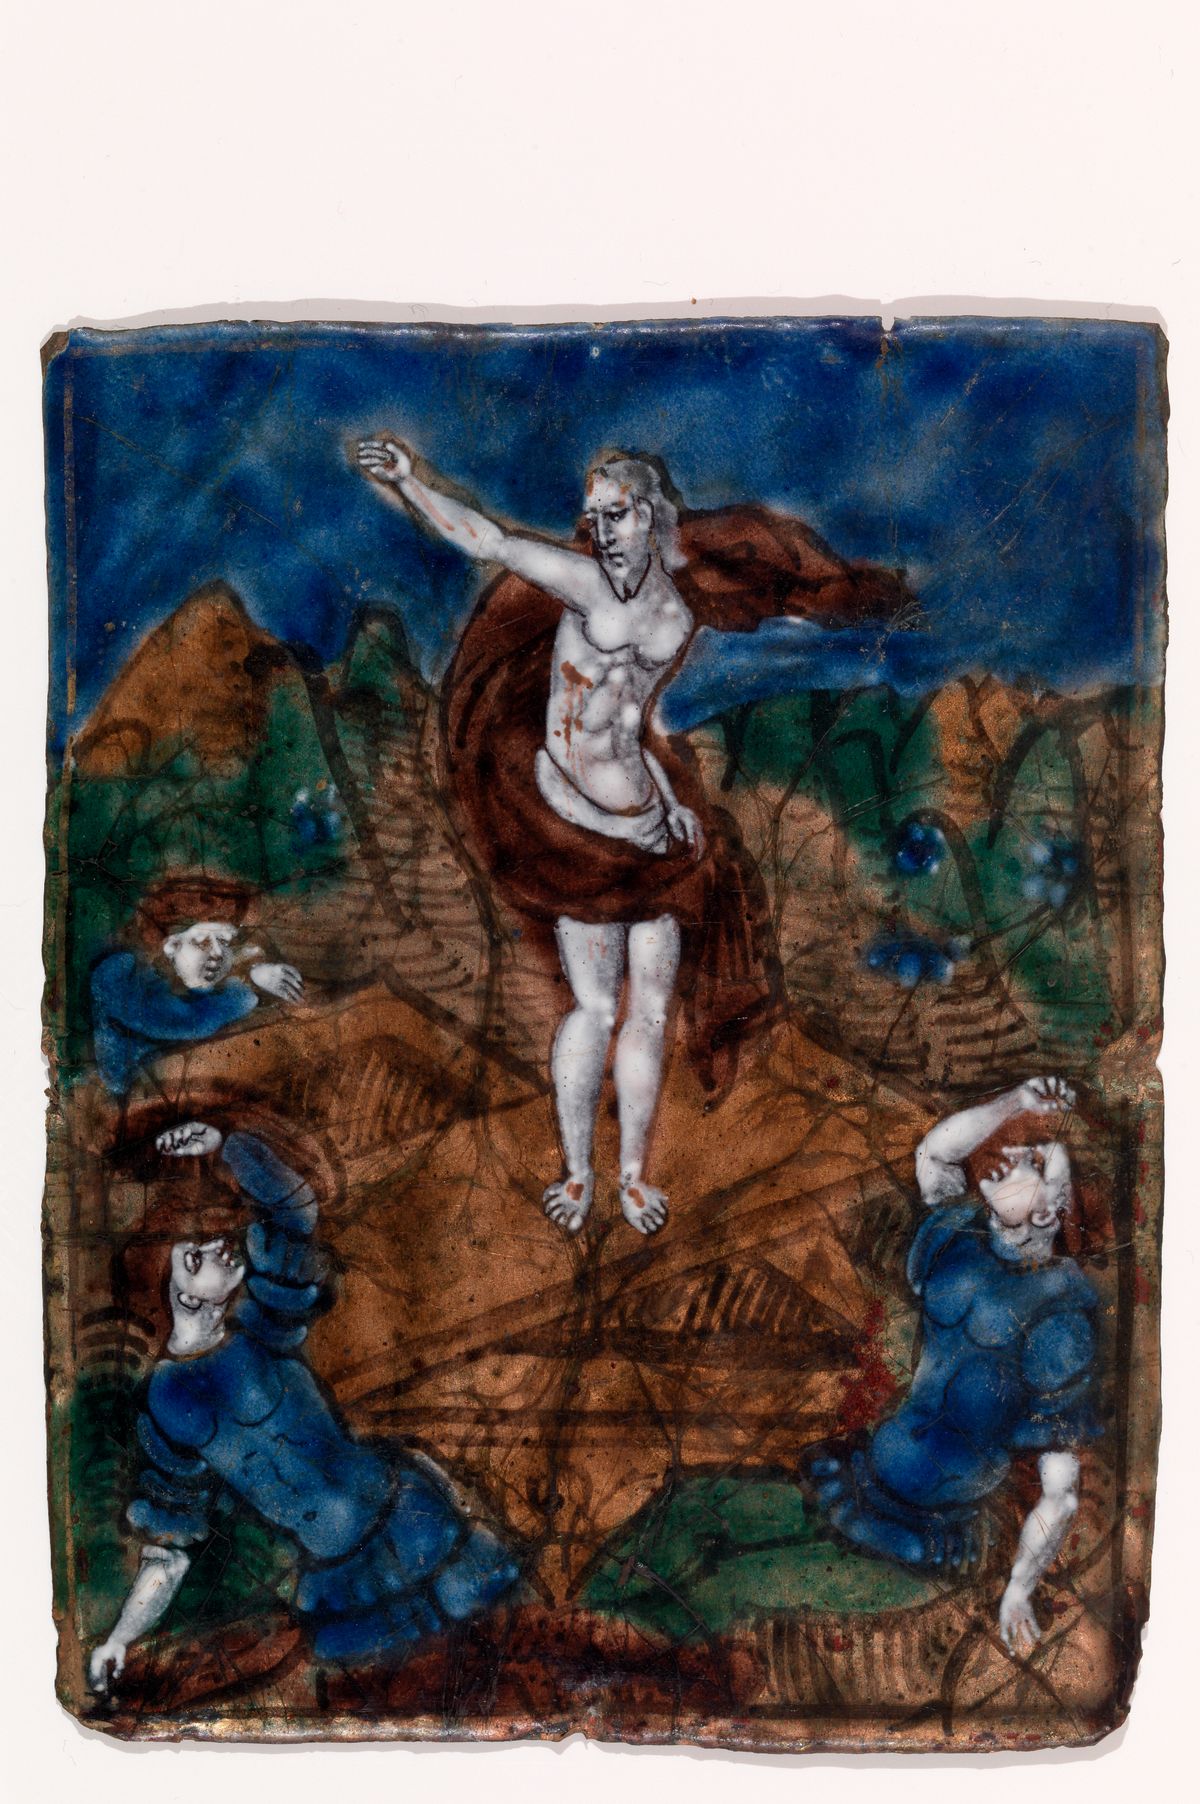 The Resurrection of Christ (Late 16th century, France) Unknown Artist - Public Domain Bible Painting